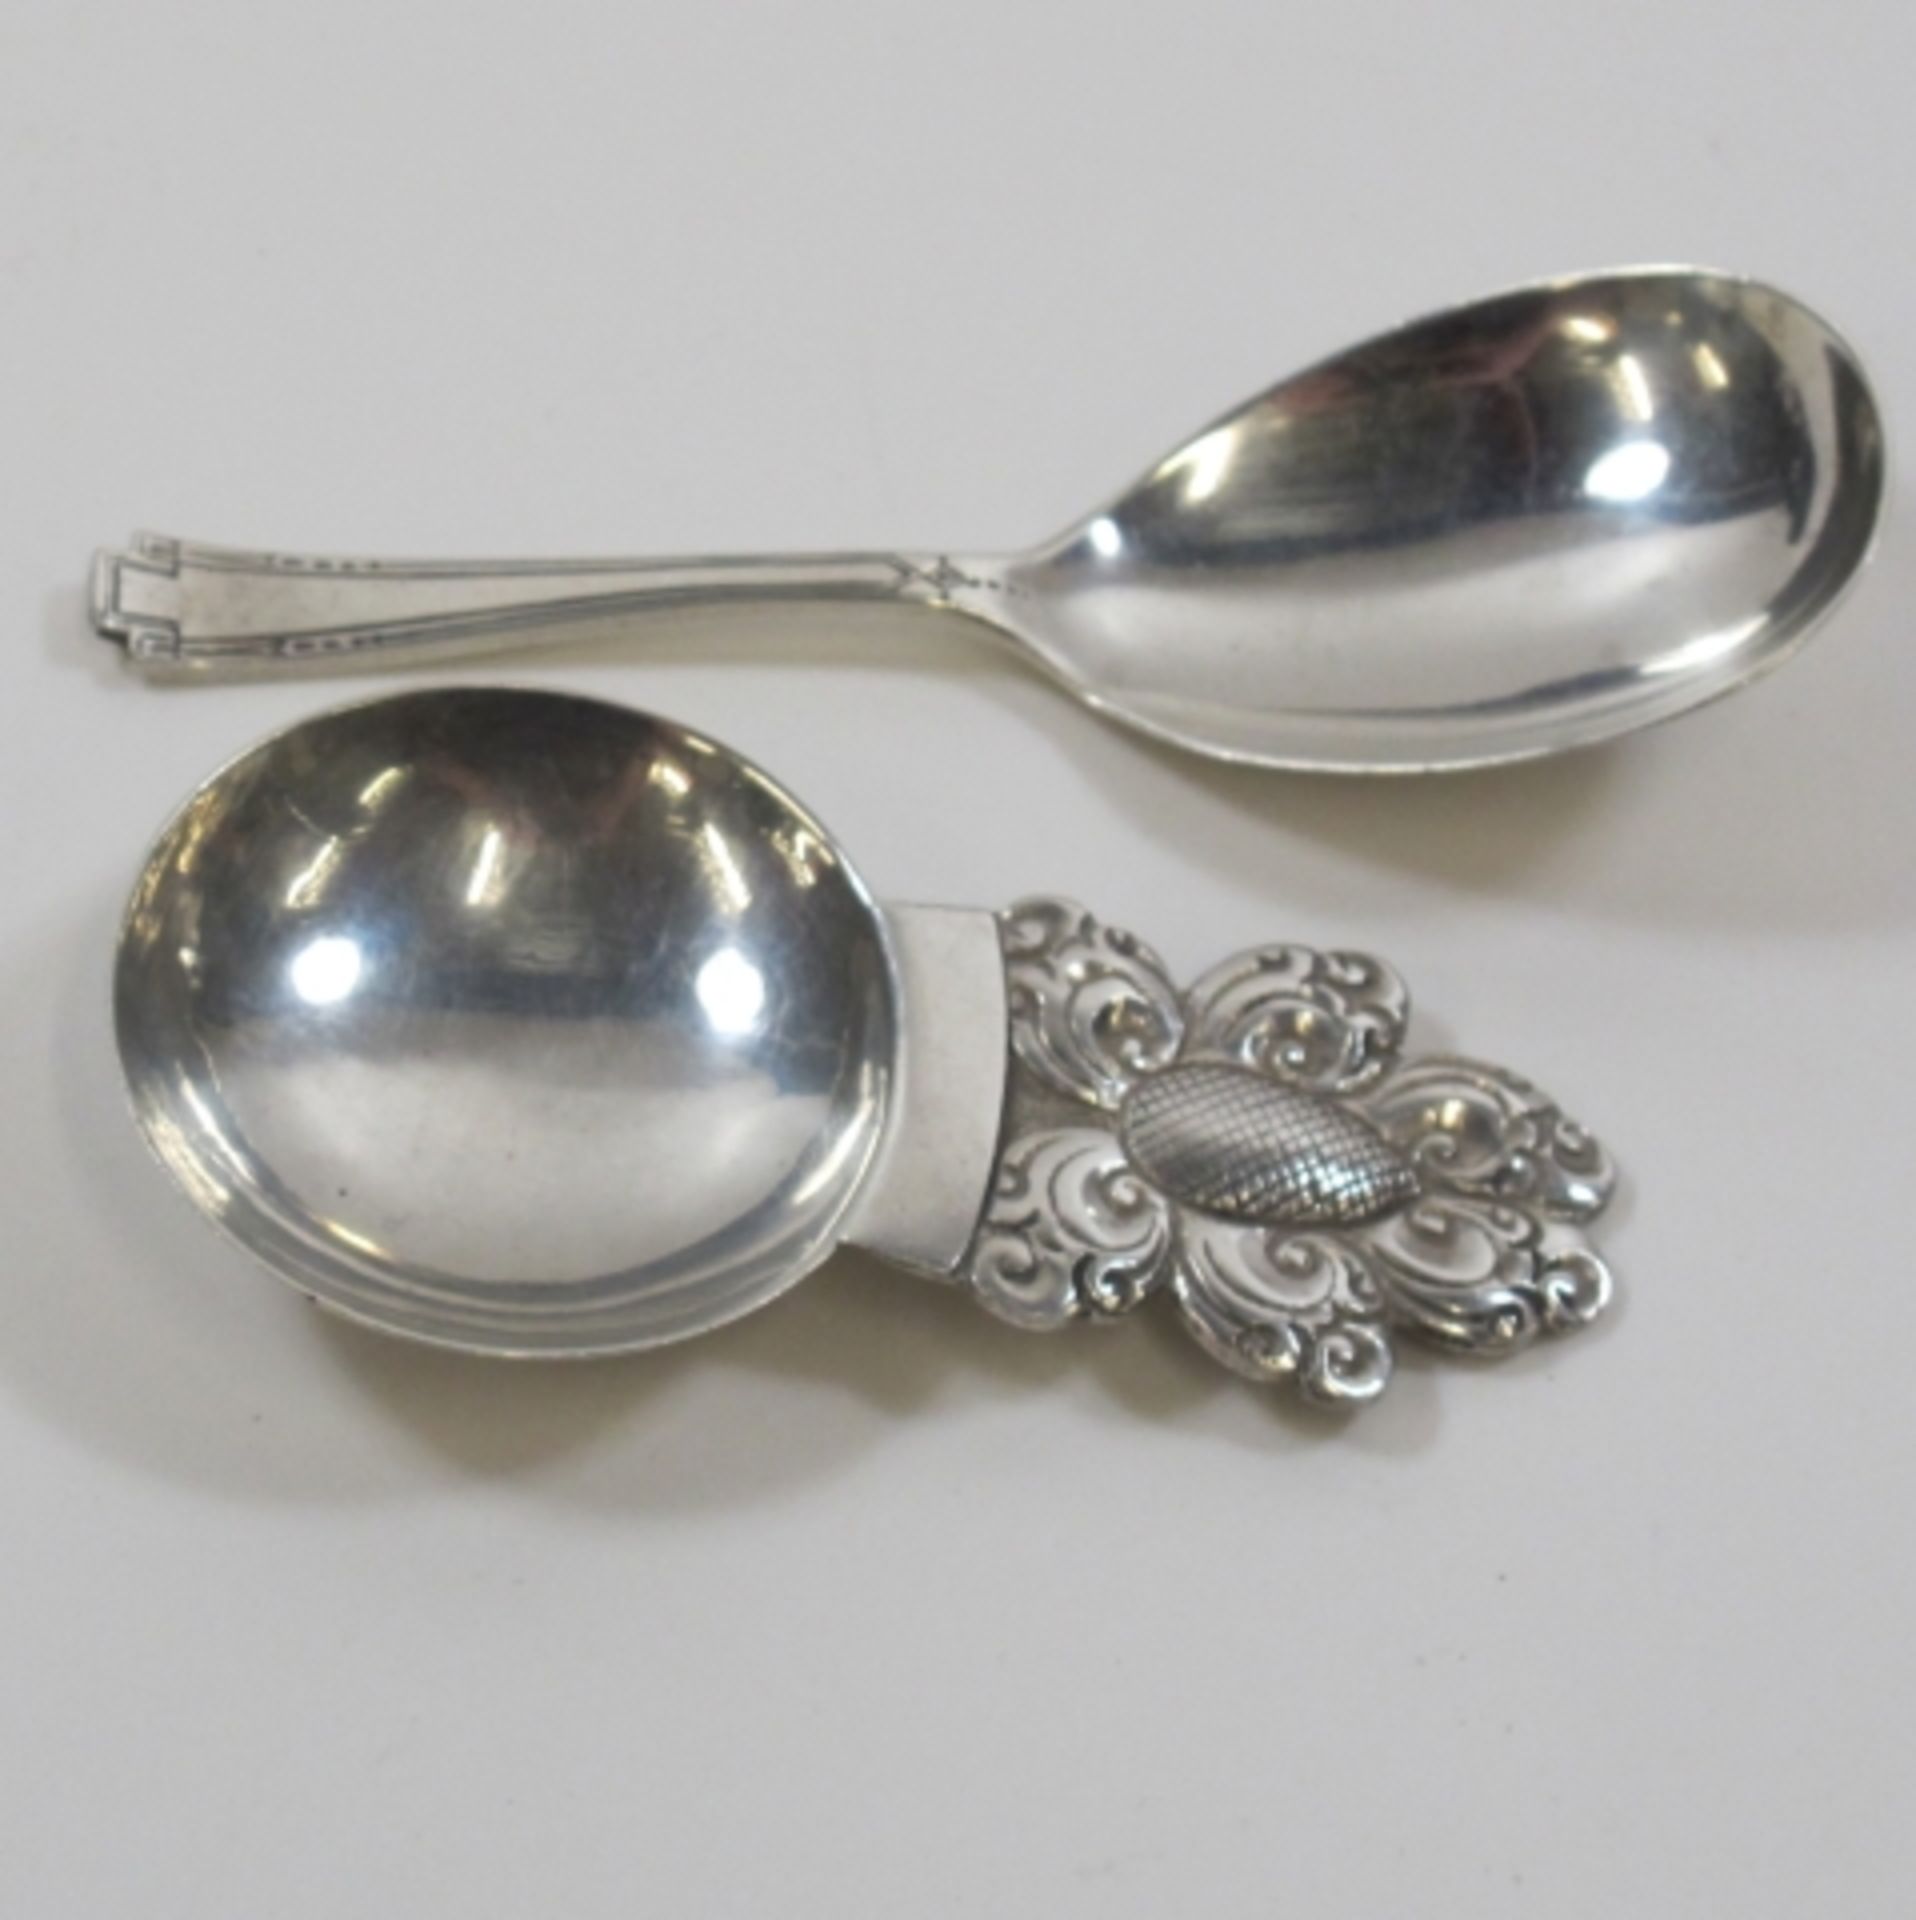 2 x Caddy spoons, 1 x Art Deco (1932) and 1 x marked SS (tests as Silver) (est. £40 - £60)